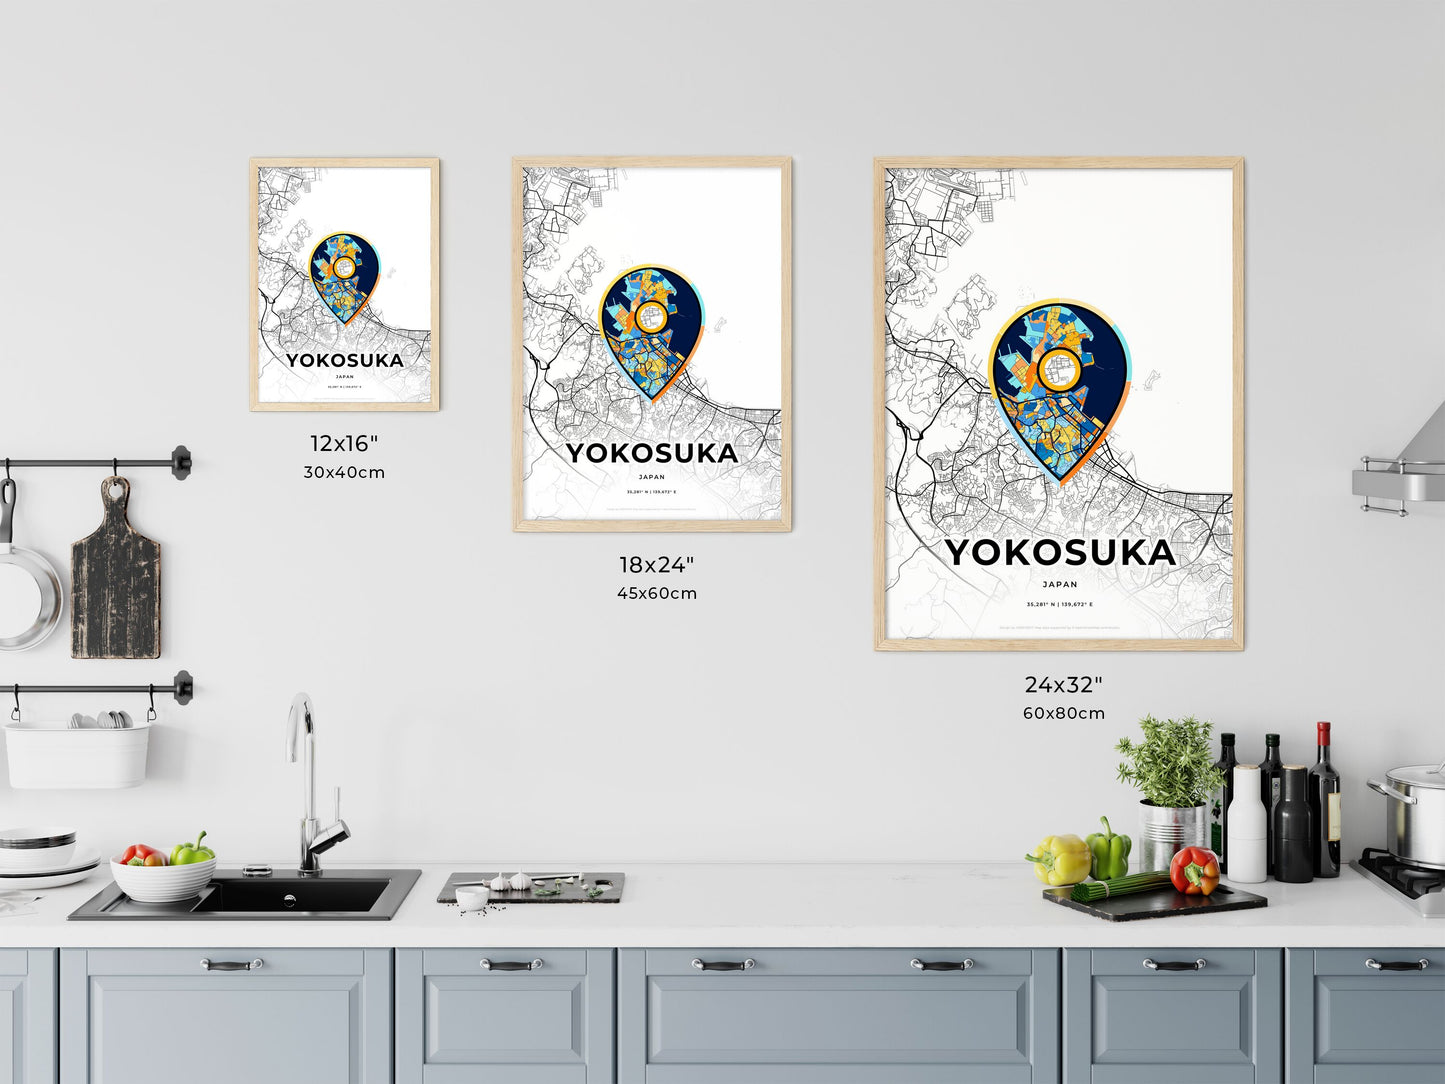 YOKOSUKA JAPAN minimal art map with a colorful icon. Where it all began, Couple map gift.